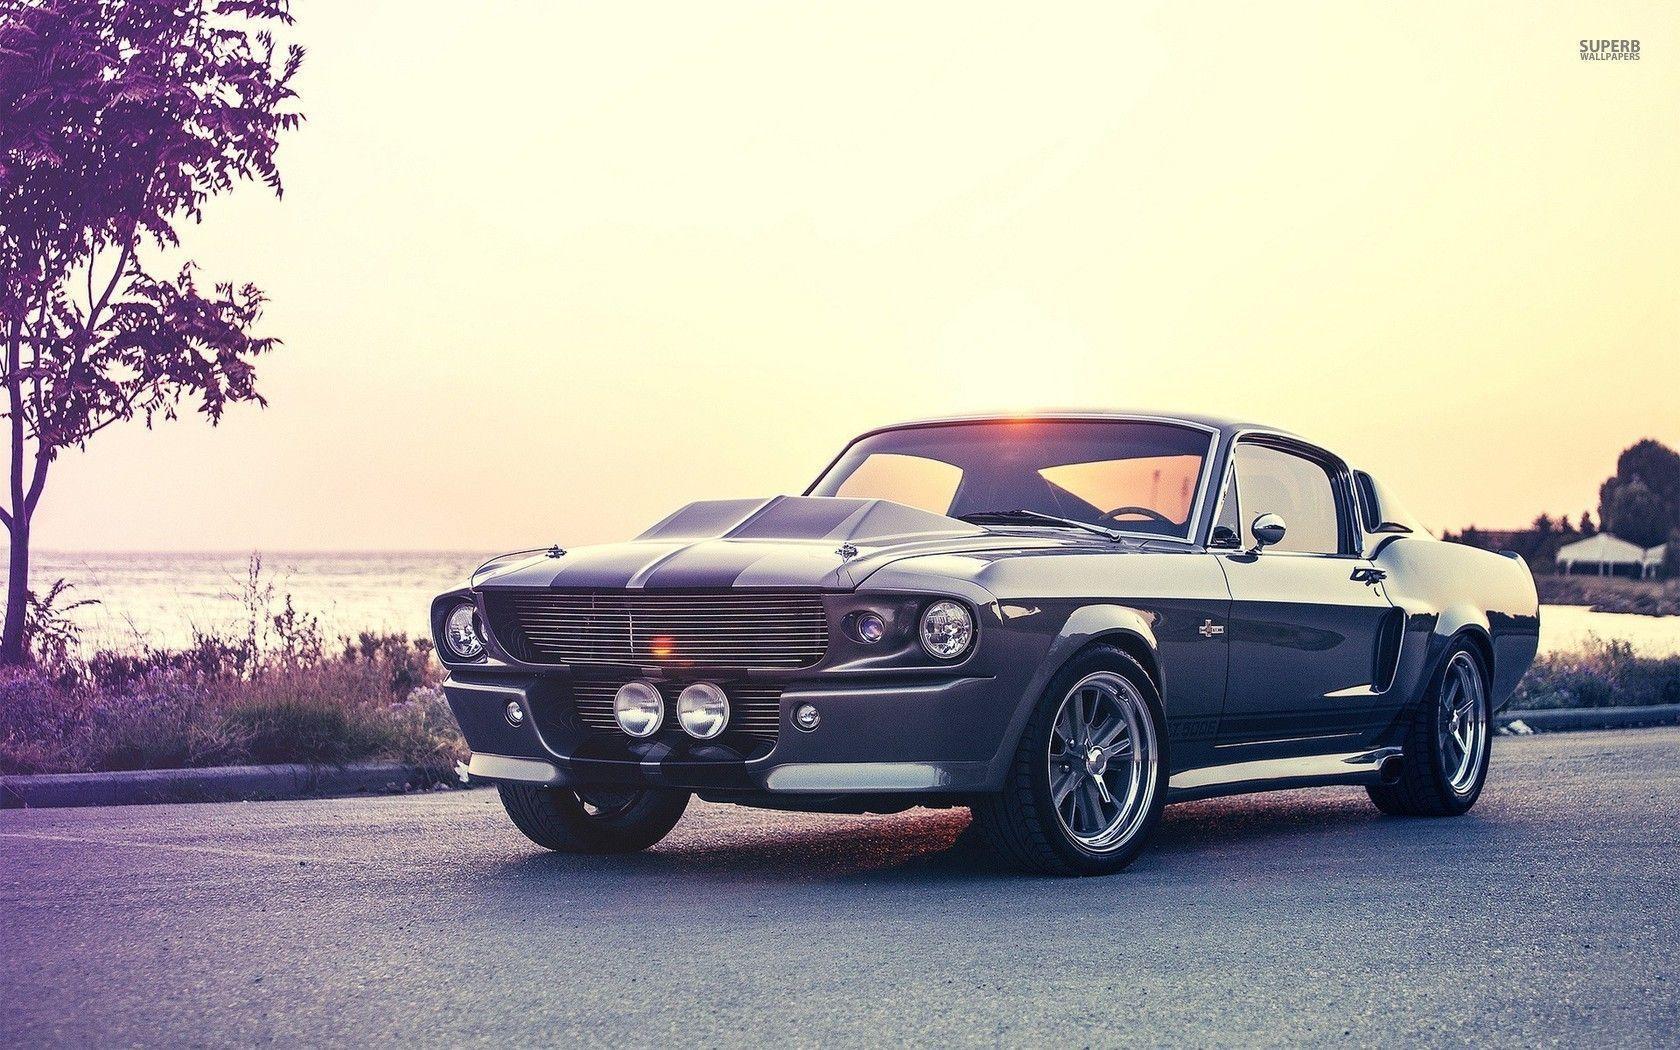 Classic Ford Mustang Wallpapers Top Free Classic Ford Mustang Backgrounds Wallpaperaccess